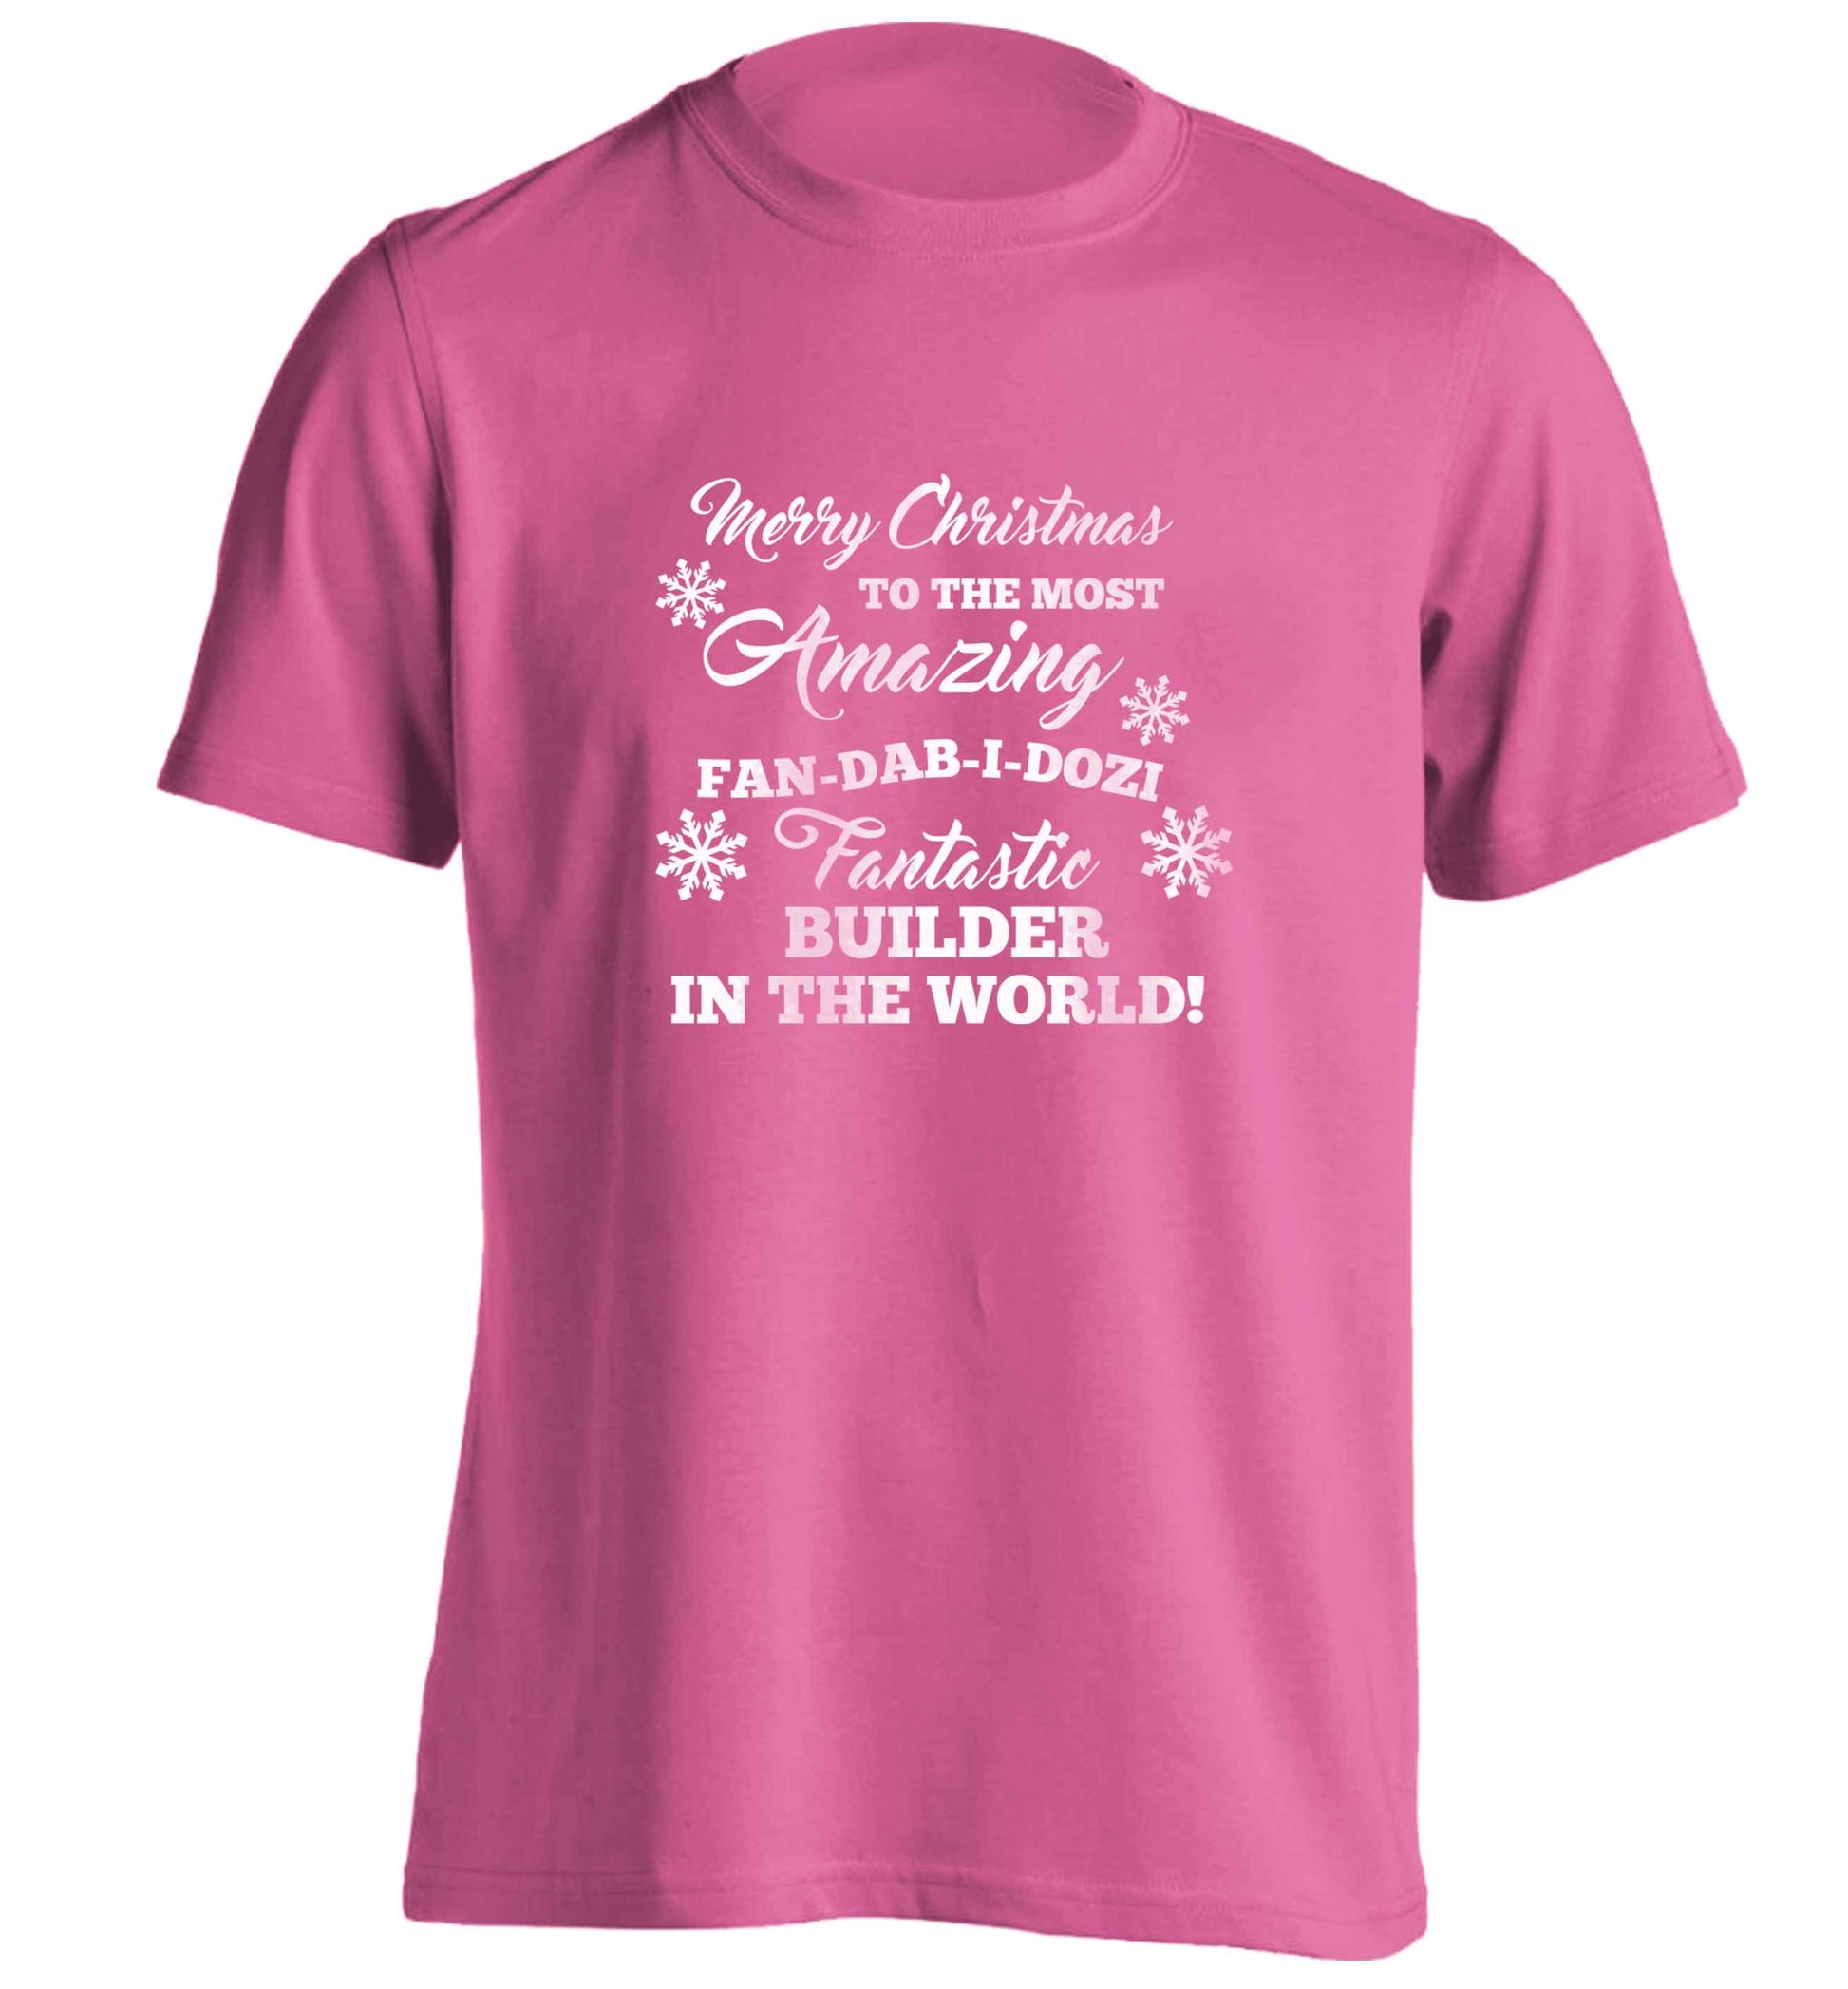 Merry Christmas to the most amazing builder in the world! adults unisex pink Tshirt 2XL